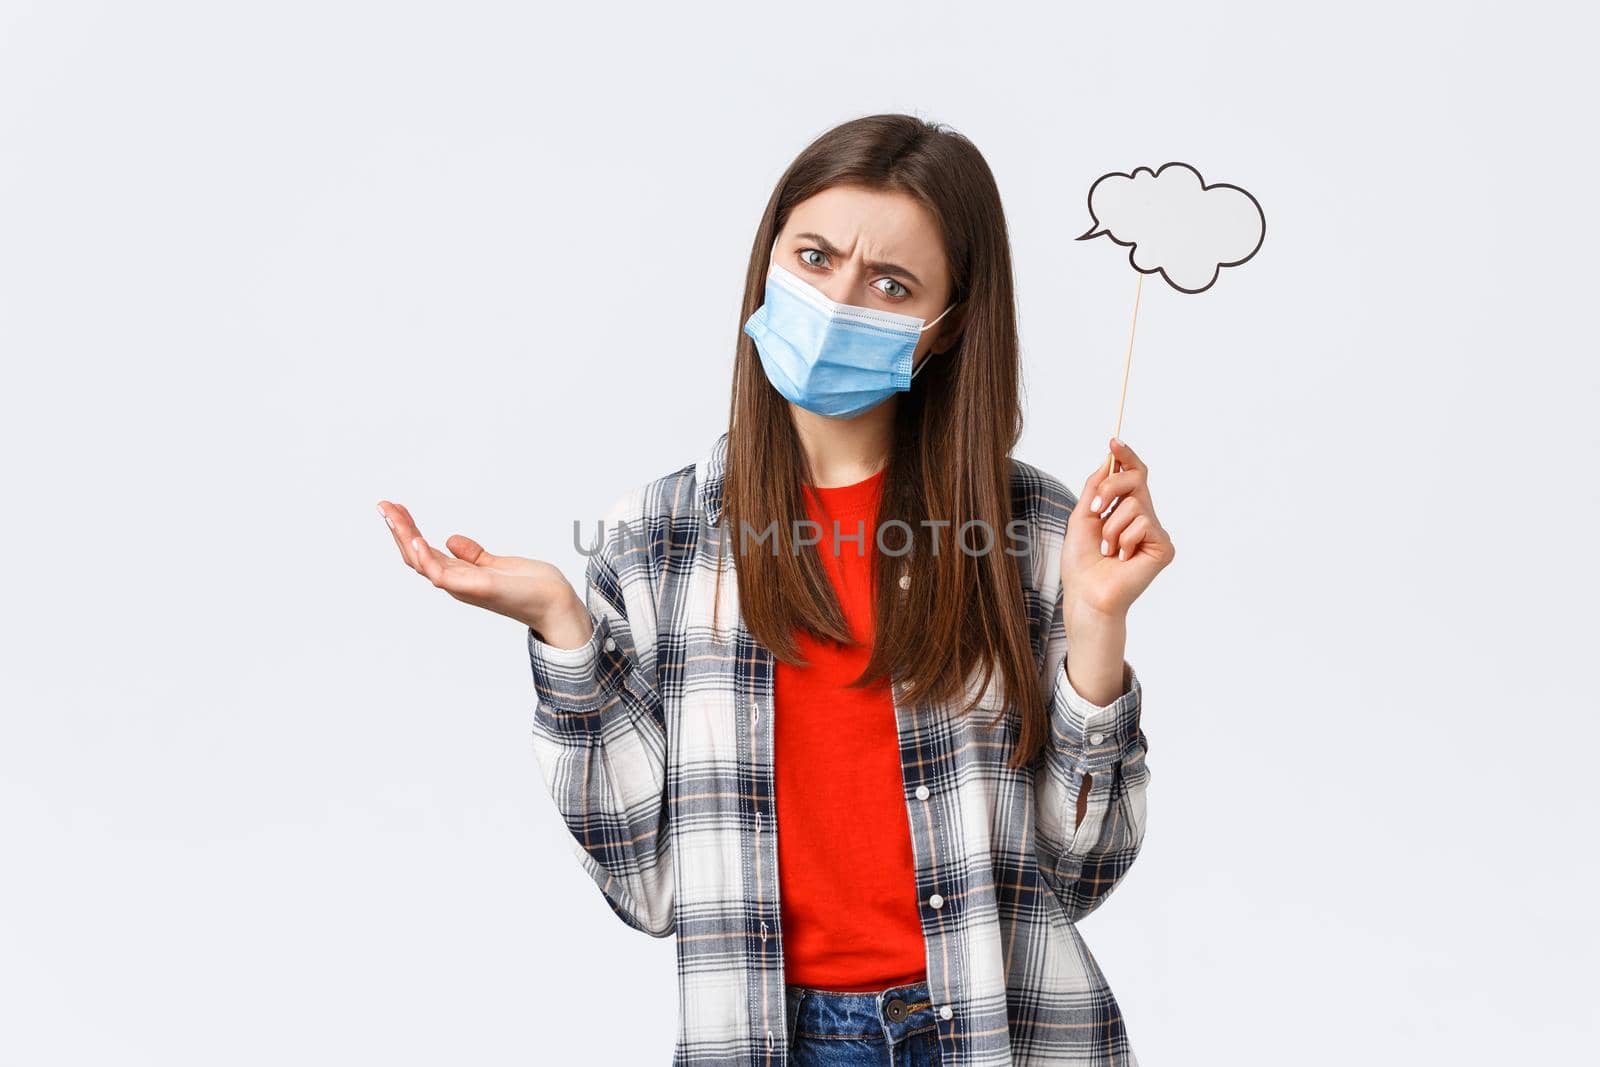 Coronavirus outbreak, leisure on quarantine, social distancing and emotions concept. Girl with bubble thought cloud looking confused, dont understand, shrugging and wear medical mask.